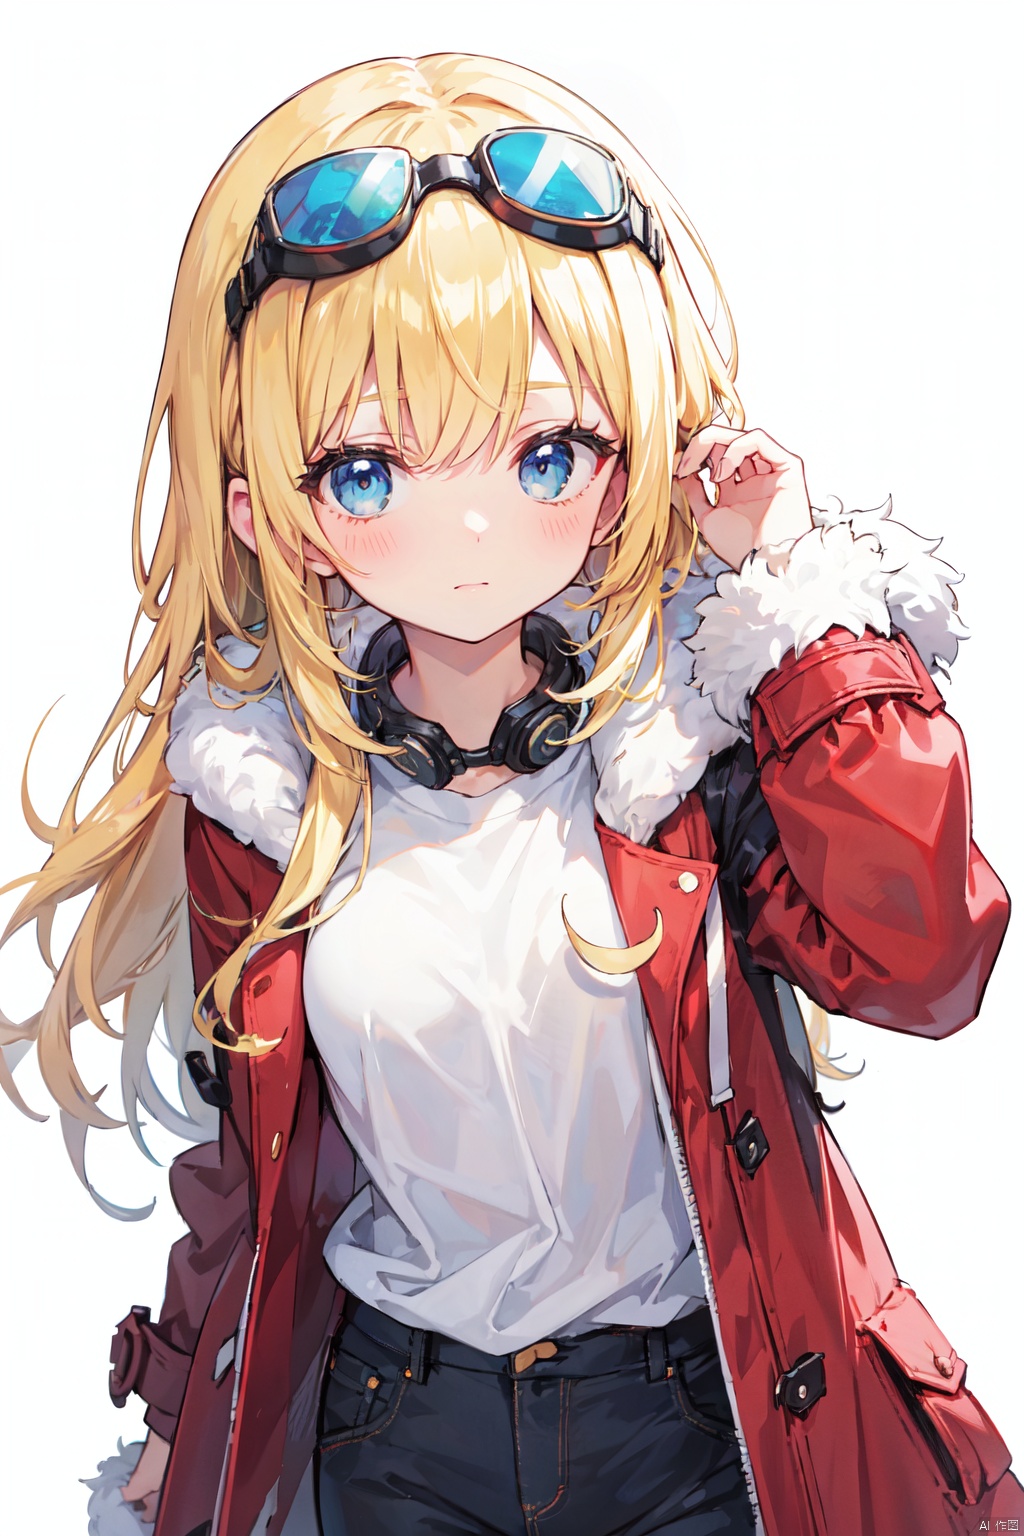 1girl, bangs, blonde_hair, blue_eyes, closed_mouth, coat, eyebrows_visible_through_hair, eyewear_on_head, fur-trimmed_coat, fur-trimmed_hood, fur-trimmed_jacket, fur_collar, fur_trim, goggles, goggles_on_head, goggles_on_headwear, jacket, long_hair, long_sleeves, looking_at_viewer, pants, red_jacket, shirt, simple_background, solo, sunglasses, white_background, white_shirt, winter_clothes